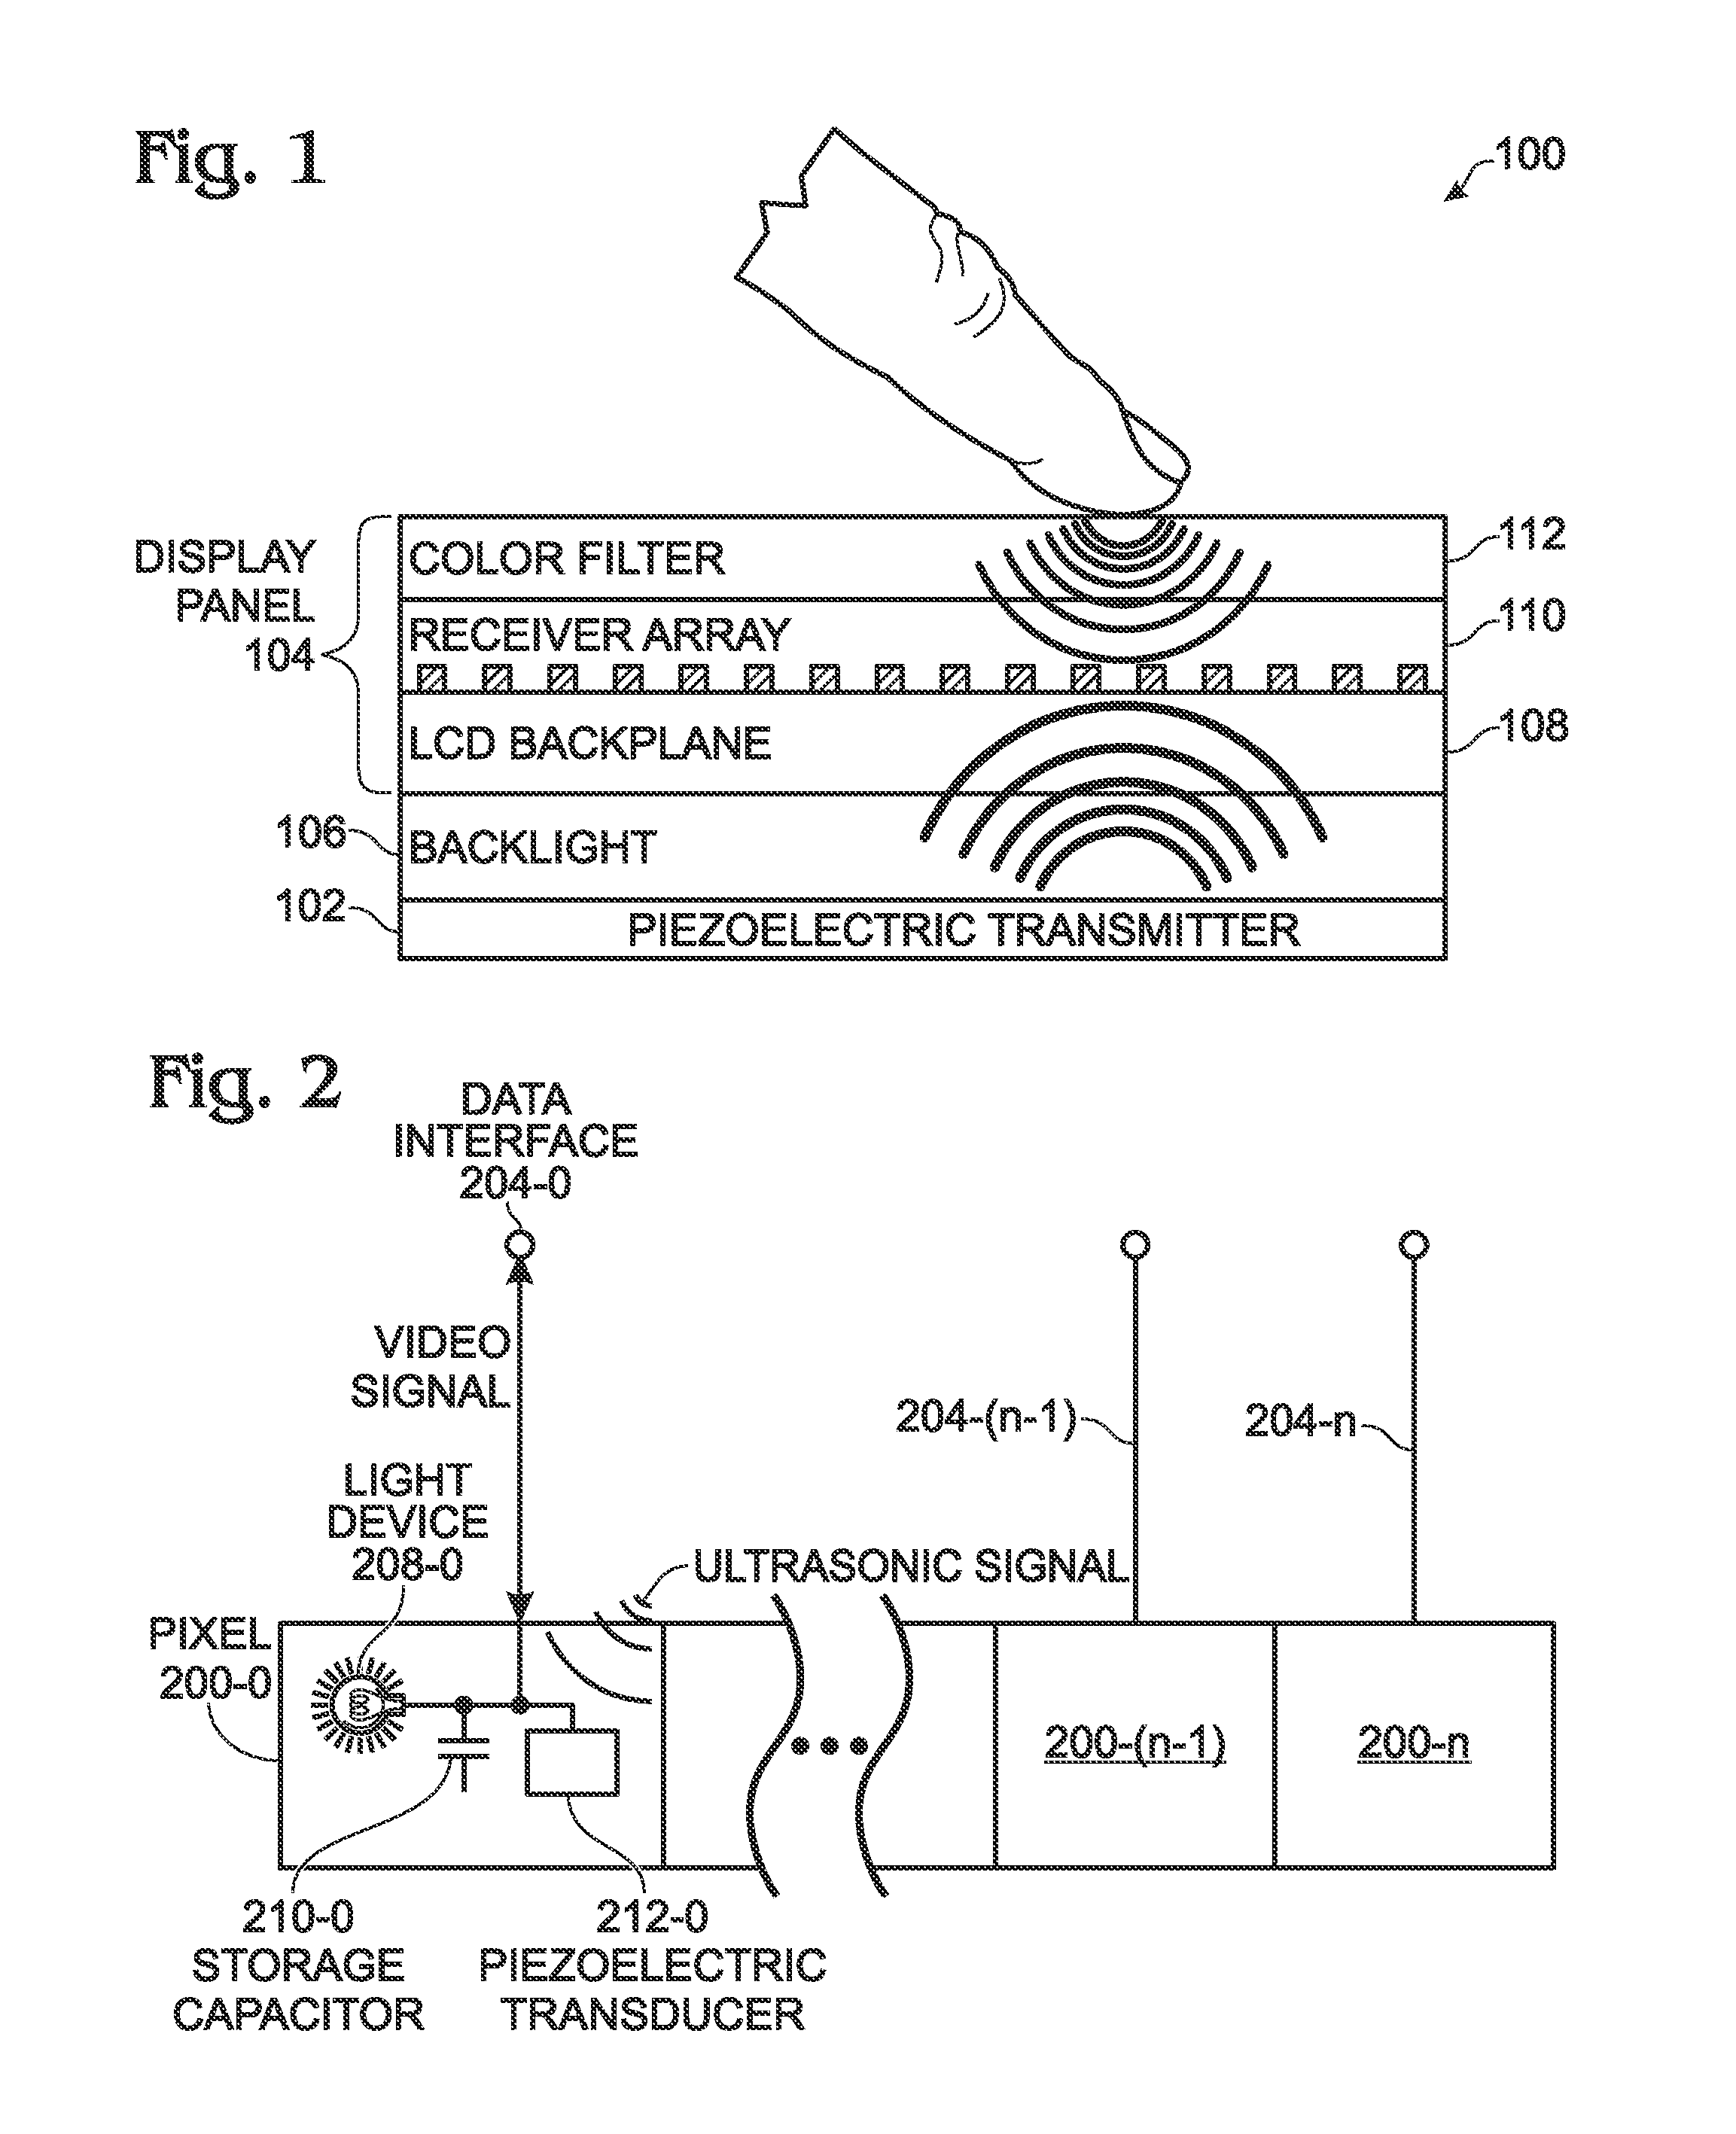 In-Pixel Ultrasonic Touch Sensor for Display Applications